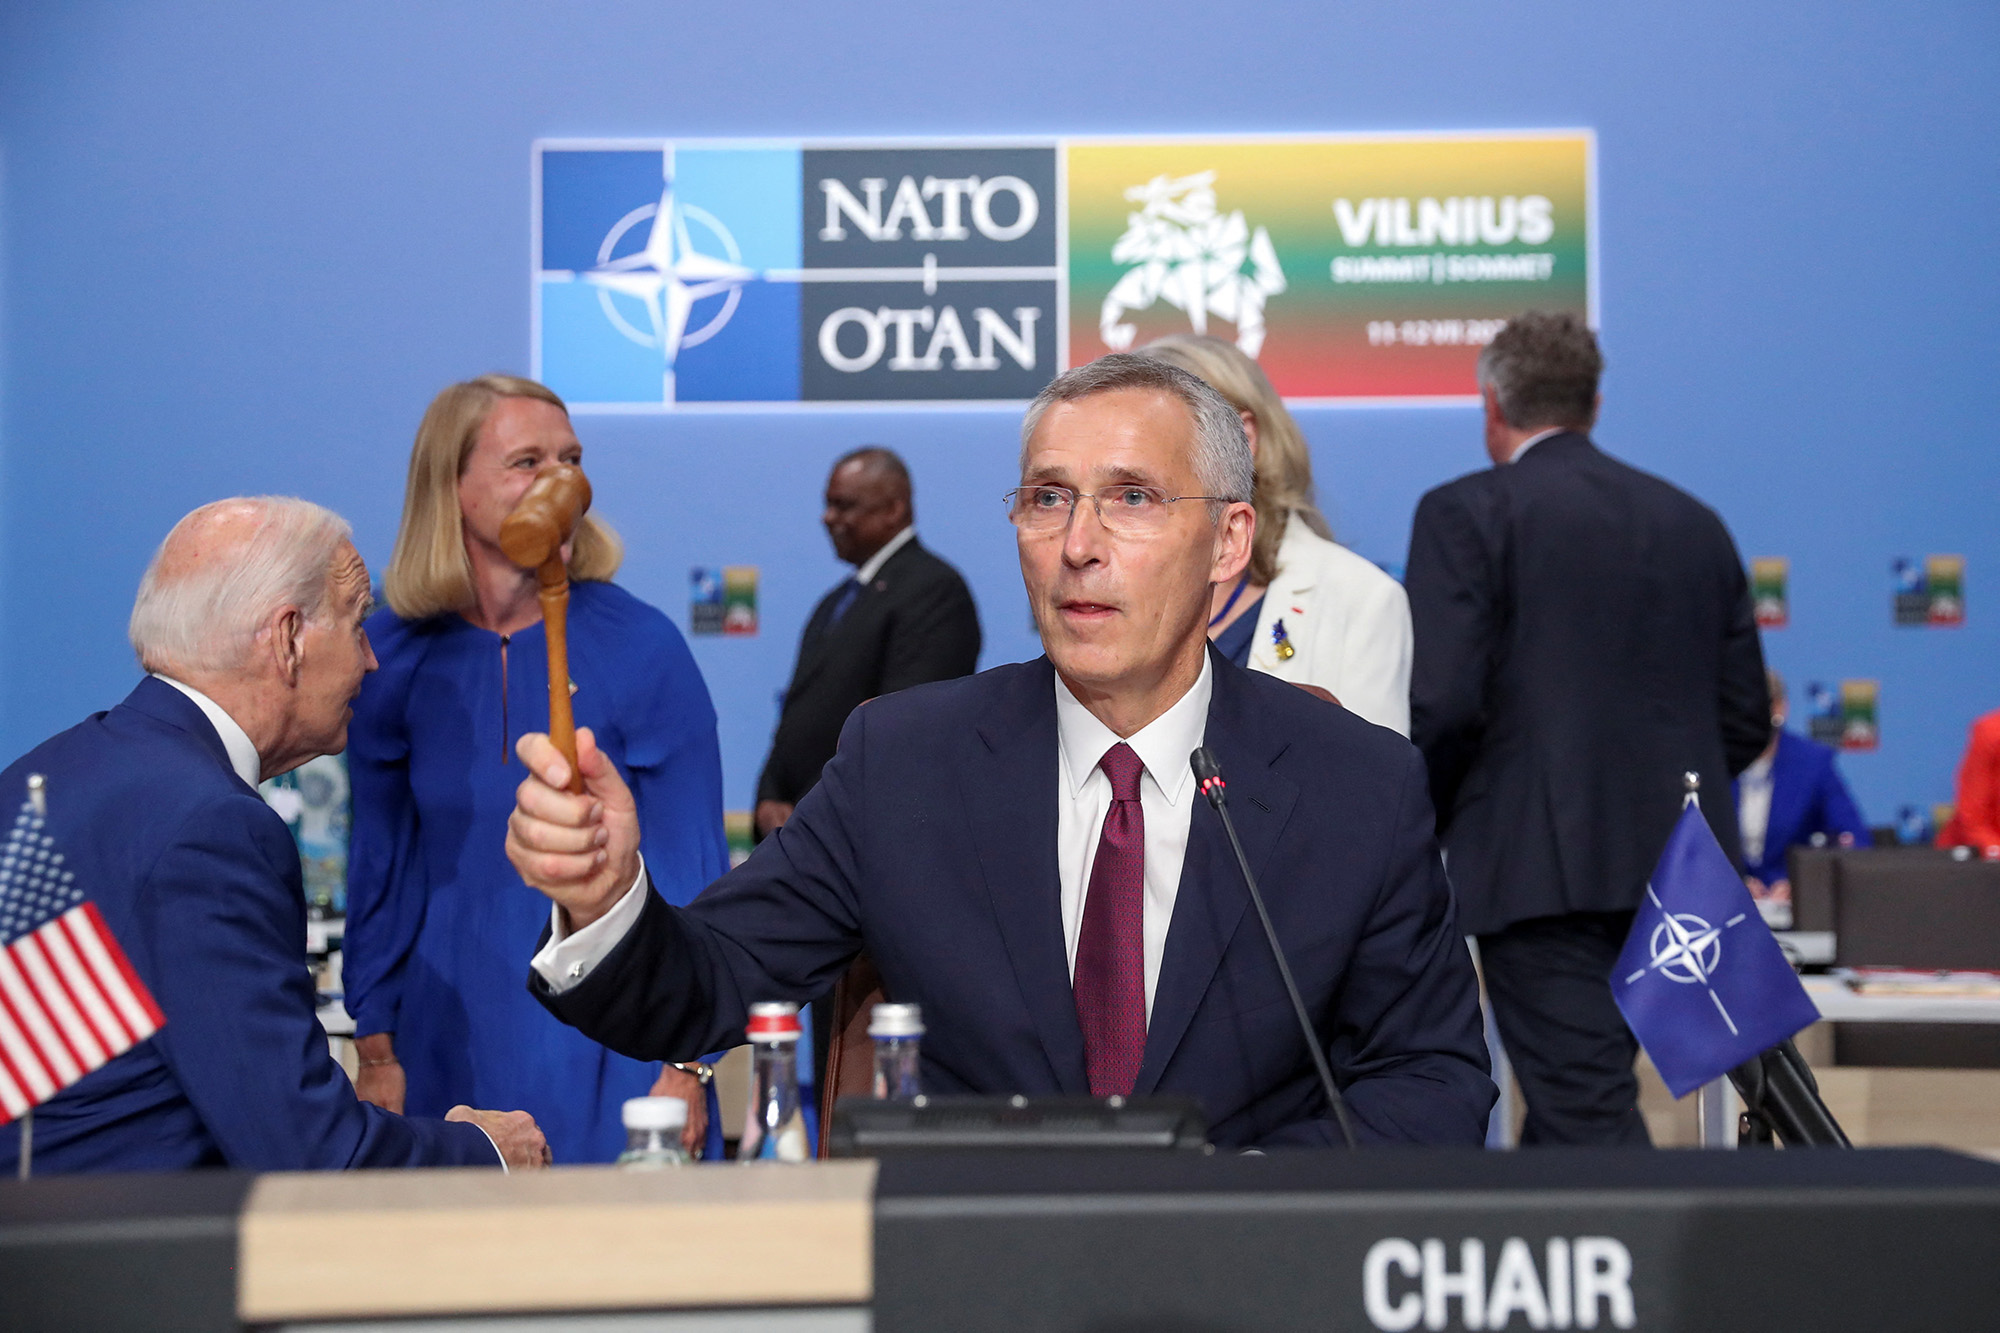 NATO Secretary-General Jens Stoltenberg chairs the NATO leaders summit in Vilnius, Lithuania, on July 11.